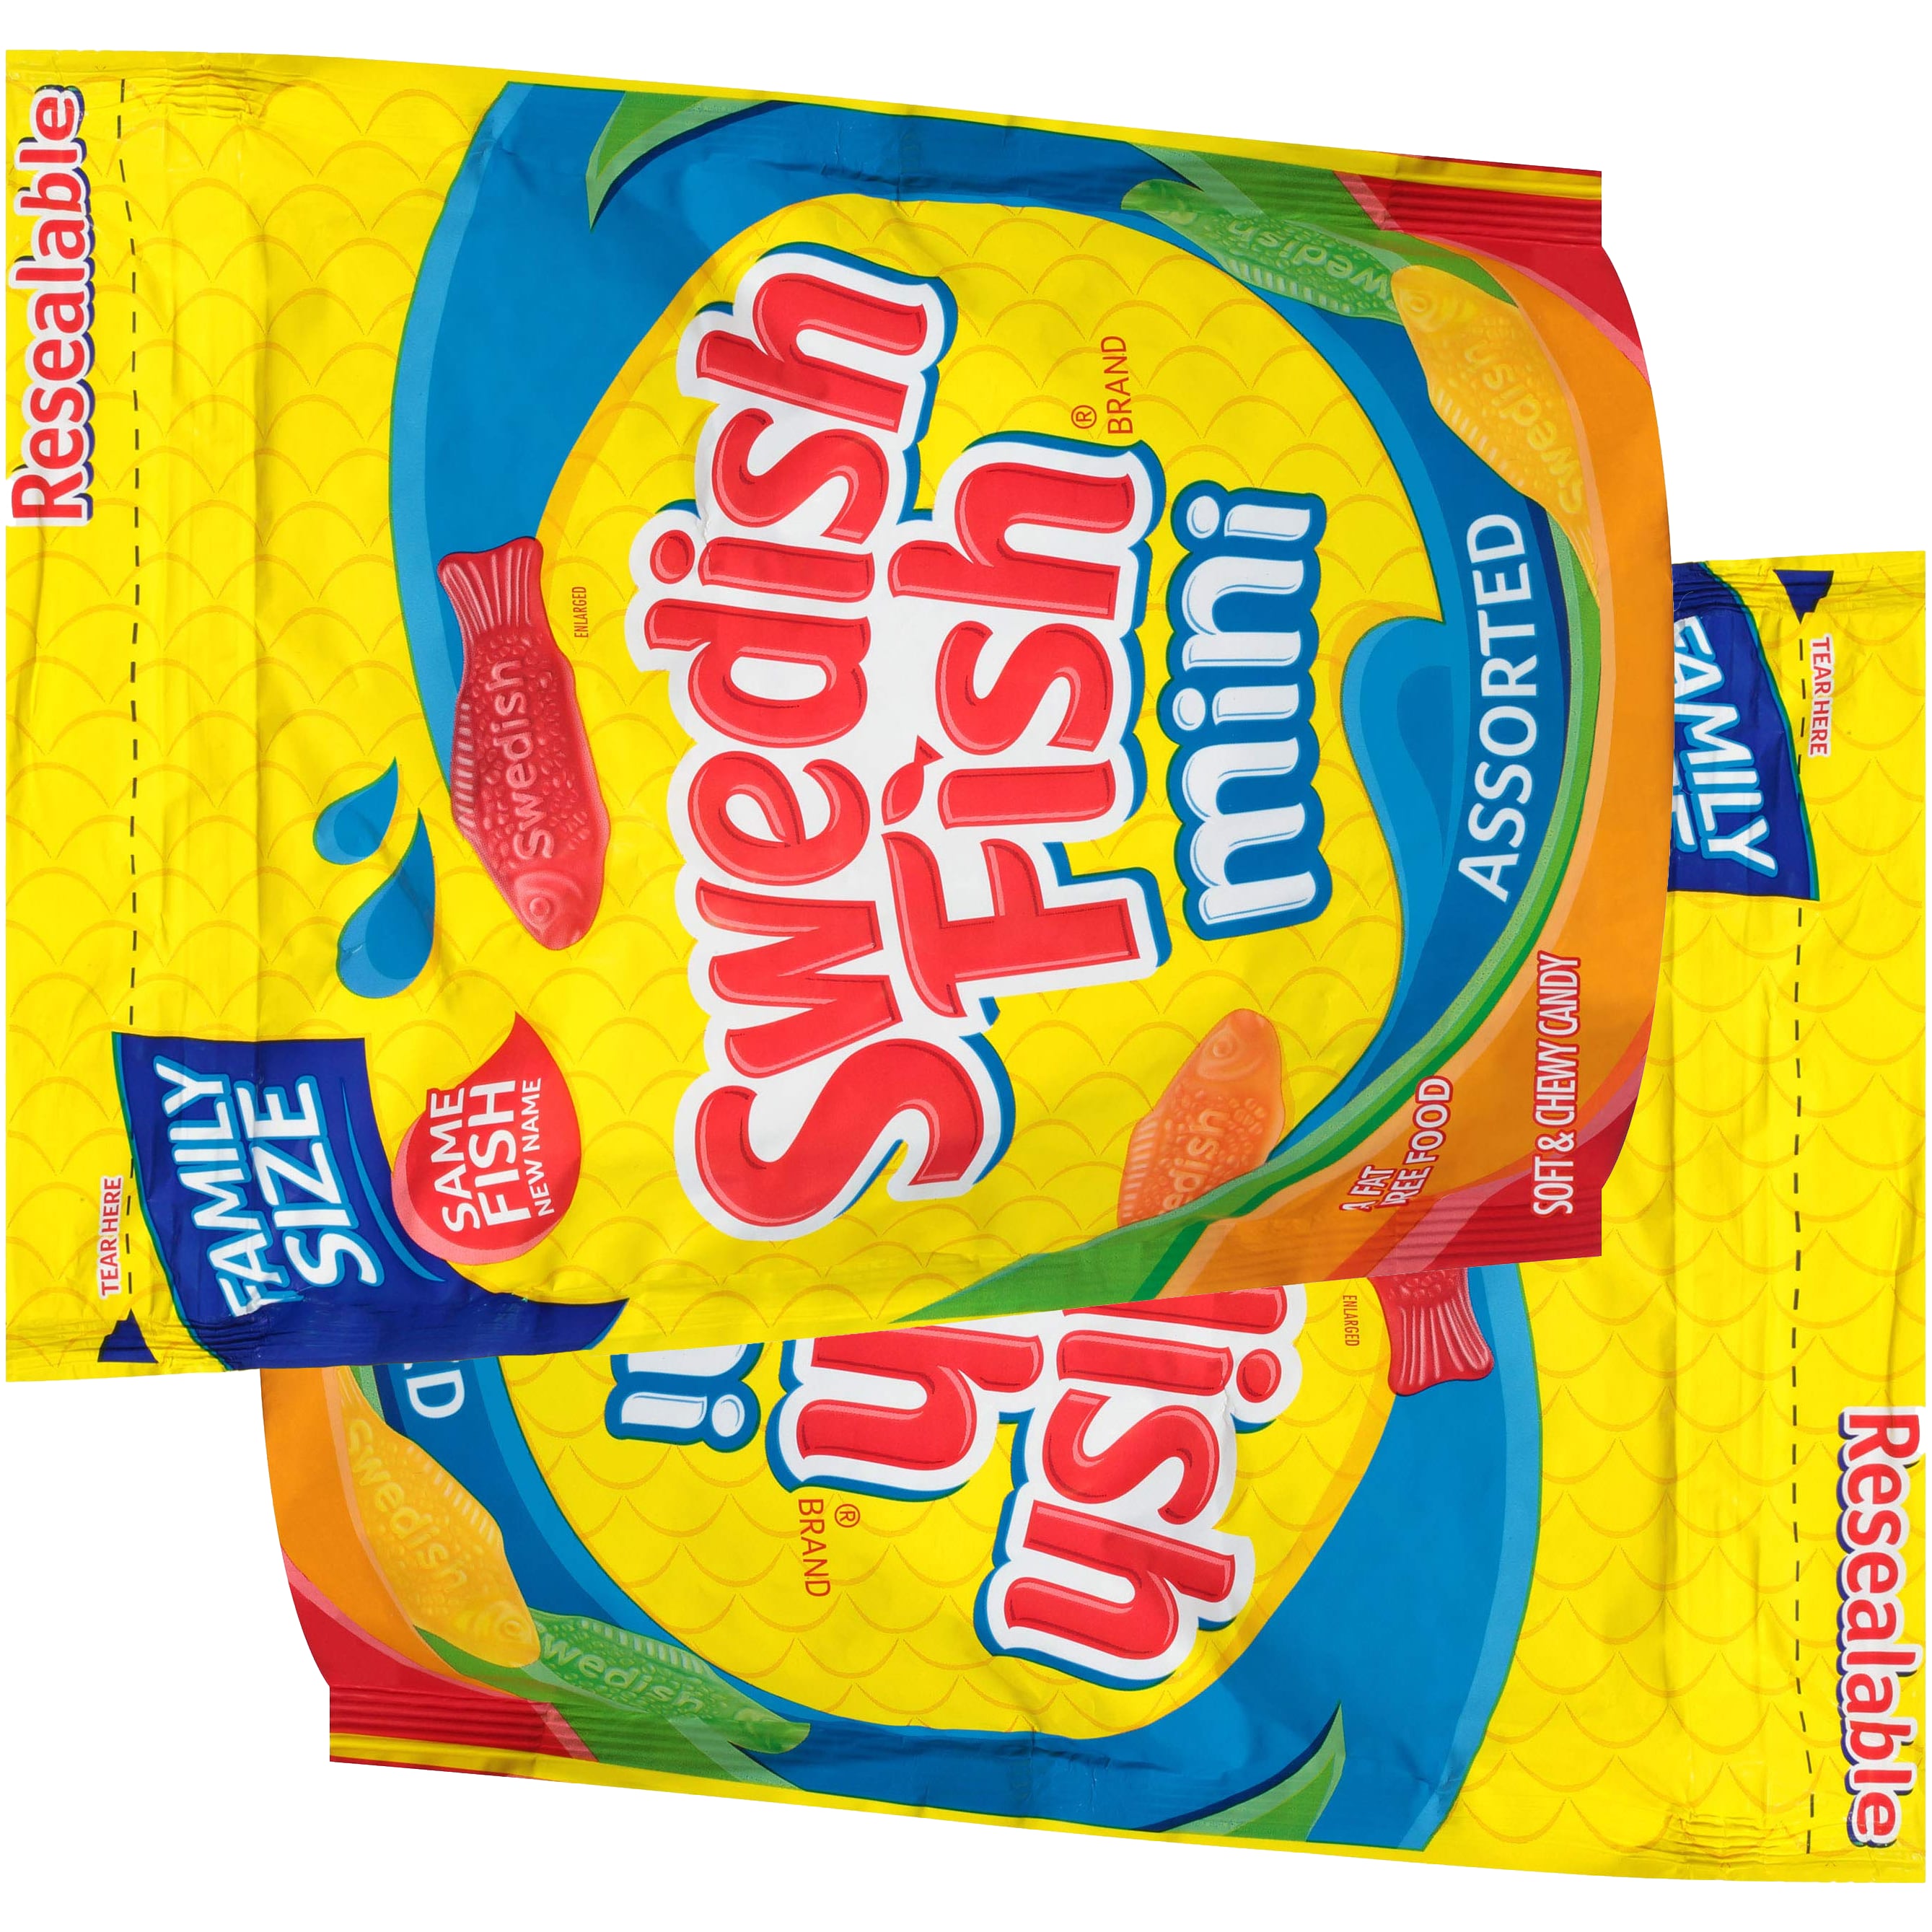 Free Swedish Fish Chewy Candy